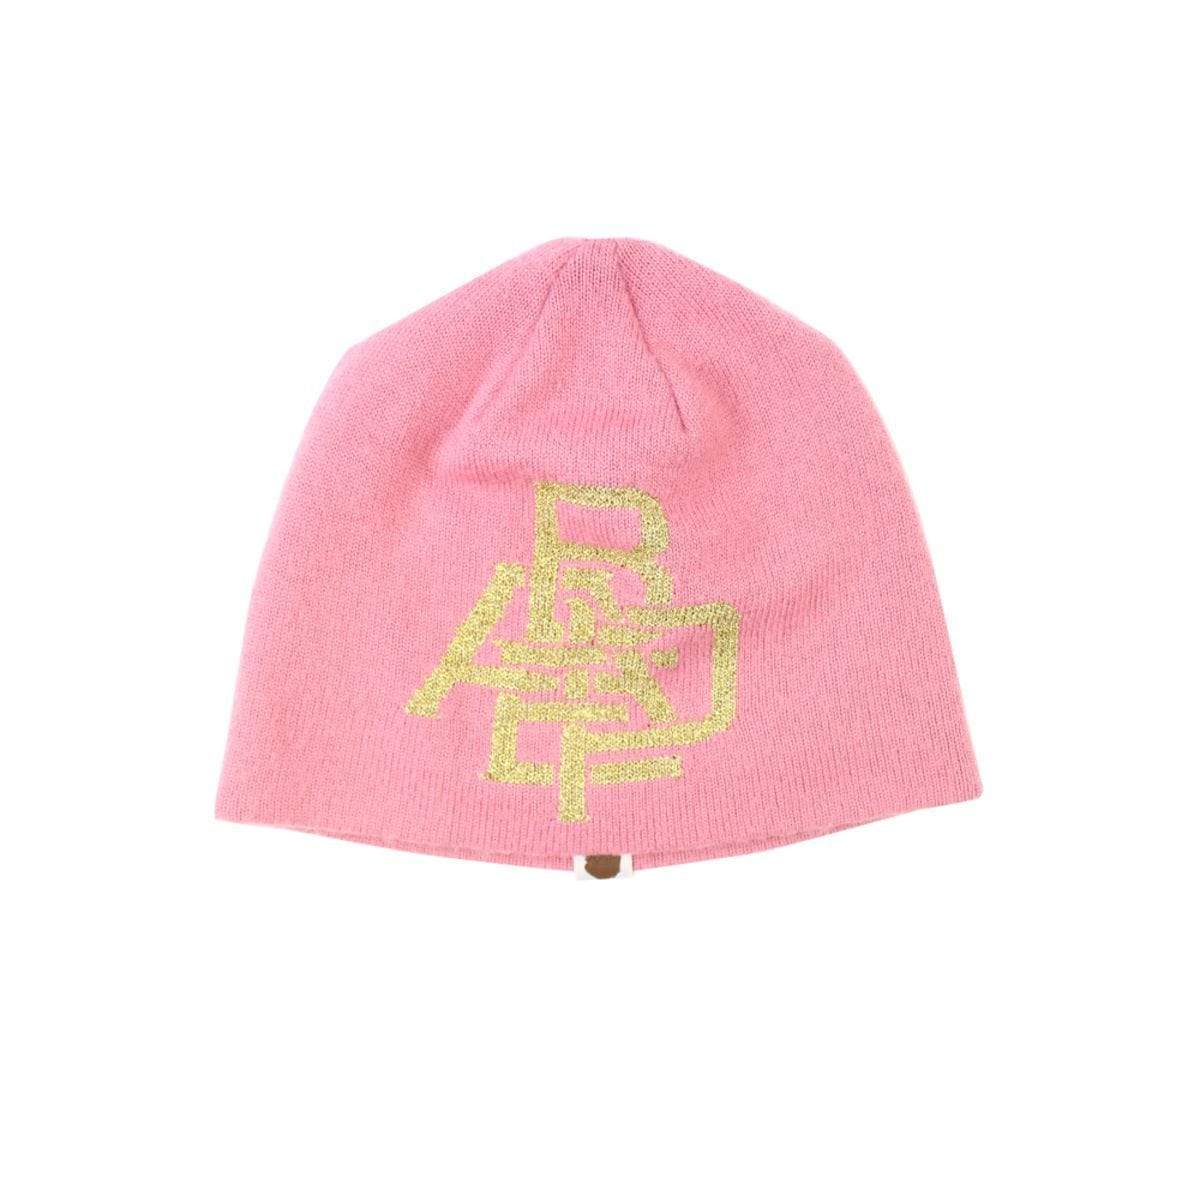 Bape text Pink Beanie - SaruGeneral